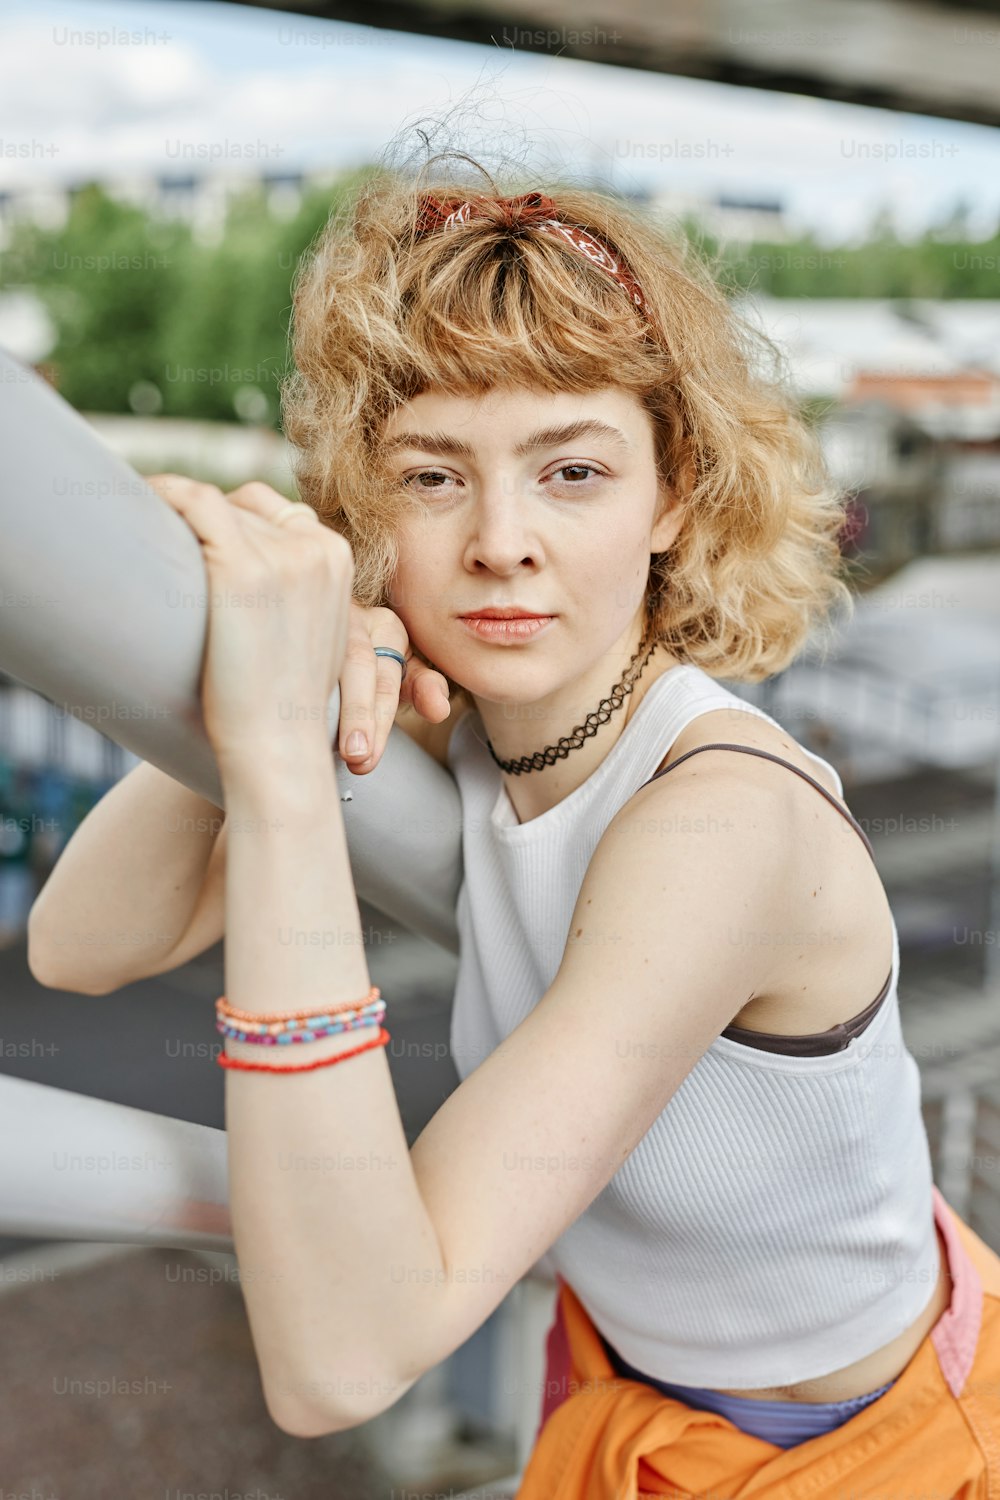 Candid portrait of young woman with curly hair looking at camera outdoors and wearing trendy outfit